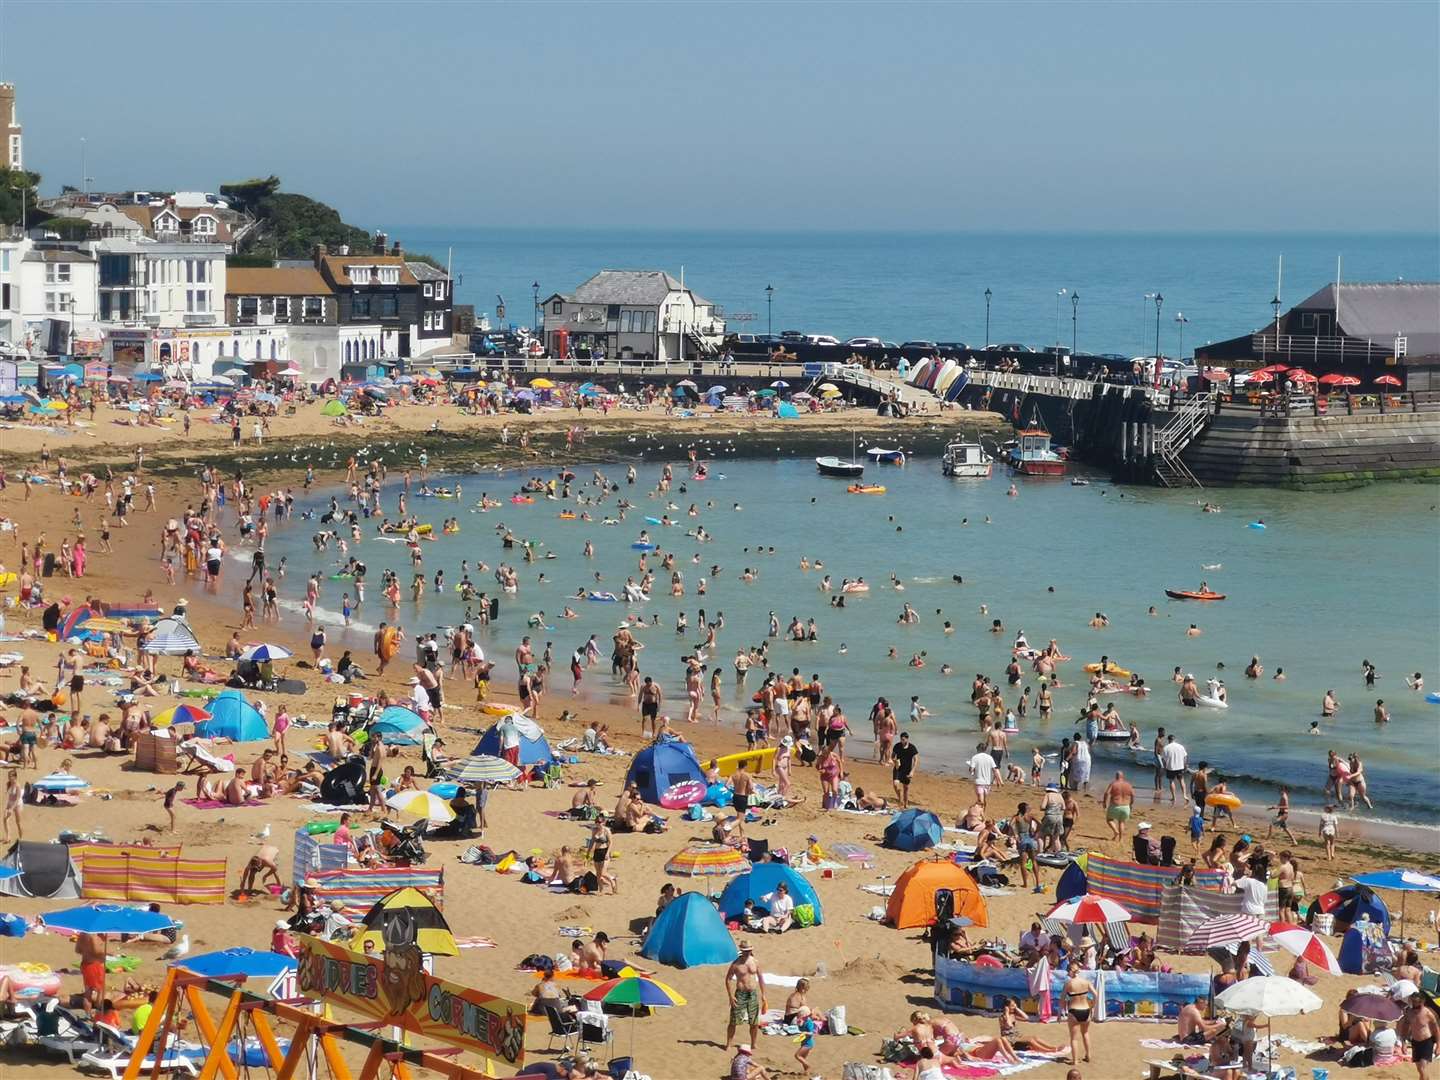 Viking Bay in Broadstairs was only given its name after 1949. Most Viking raids in Thanet were launched from the nearby Pegwell Bay area